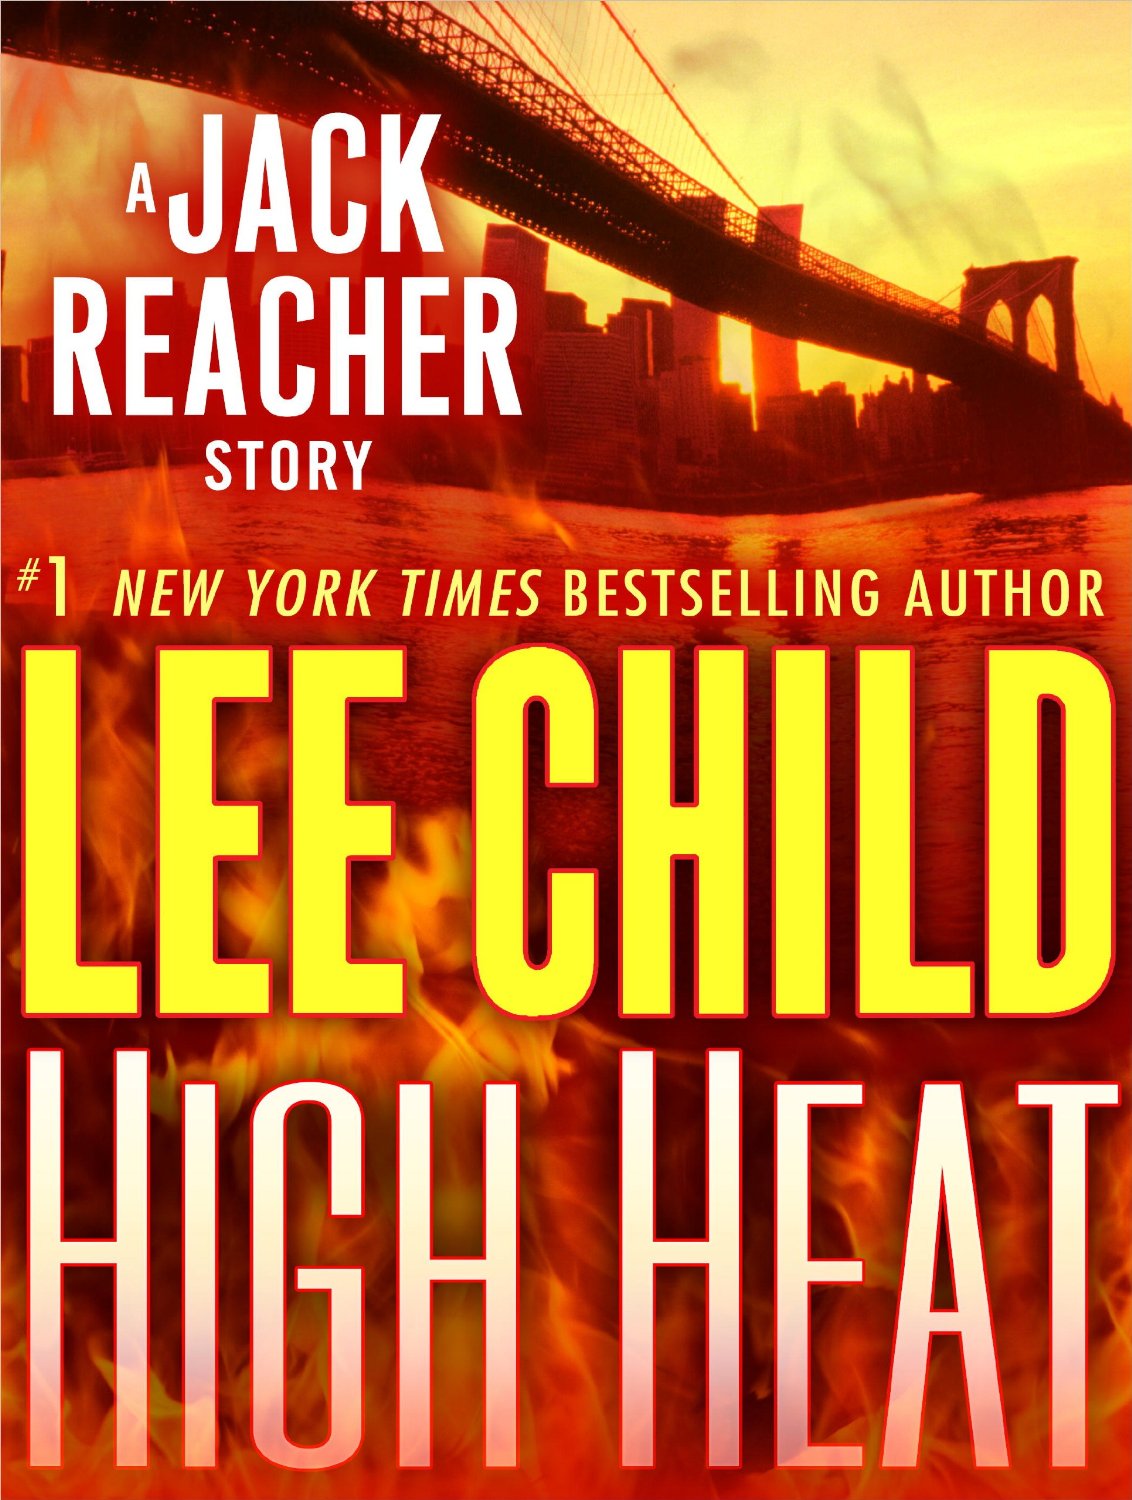 Second Son by Lee Child